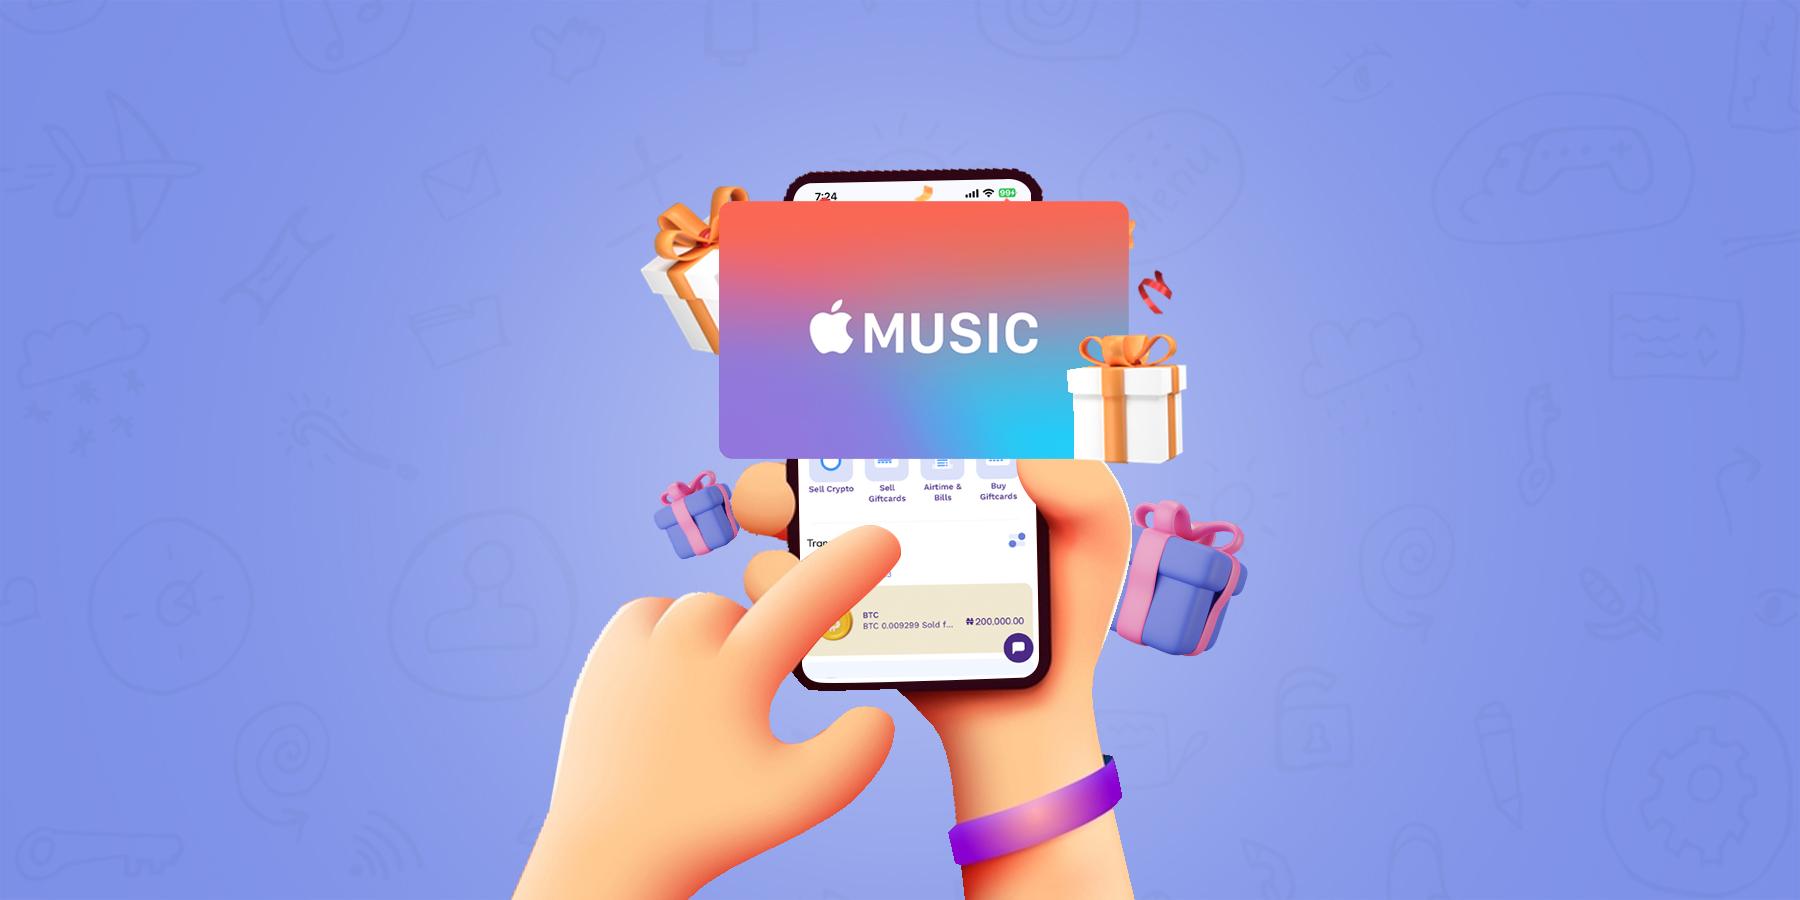 How to Check Apple Gift Card Balance 